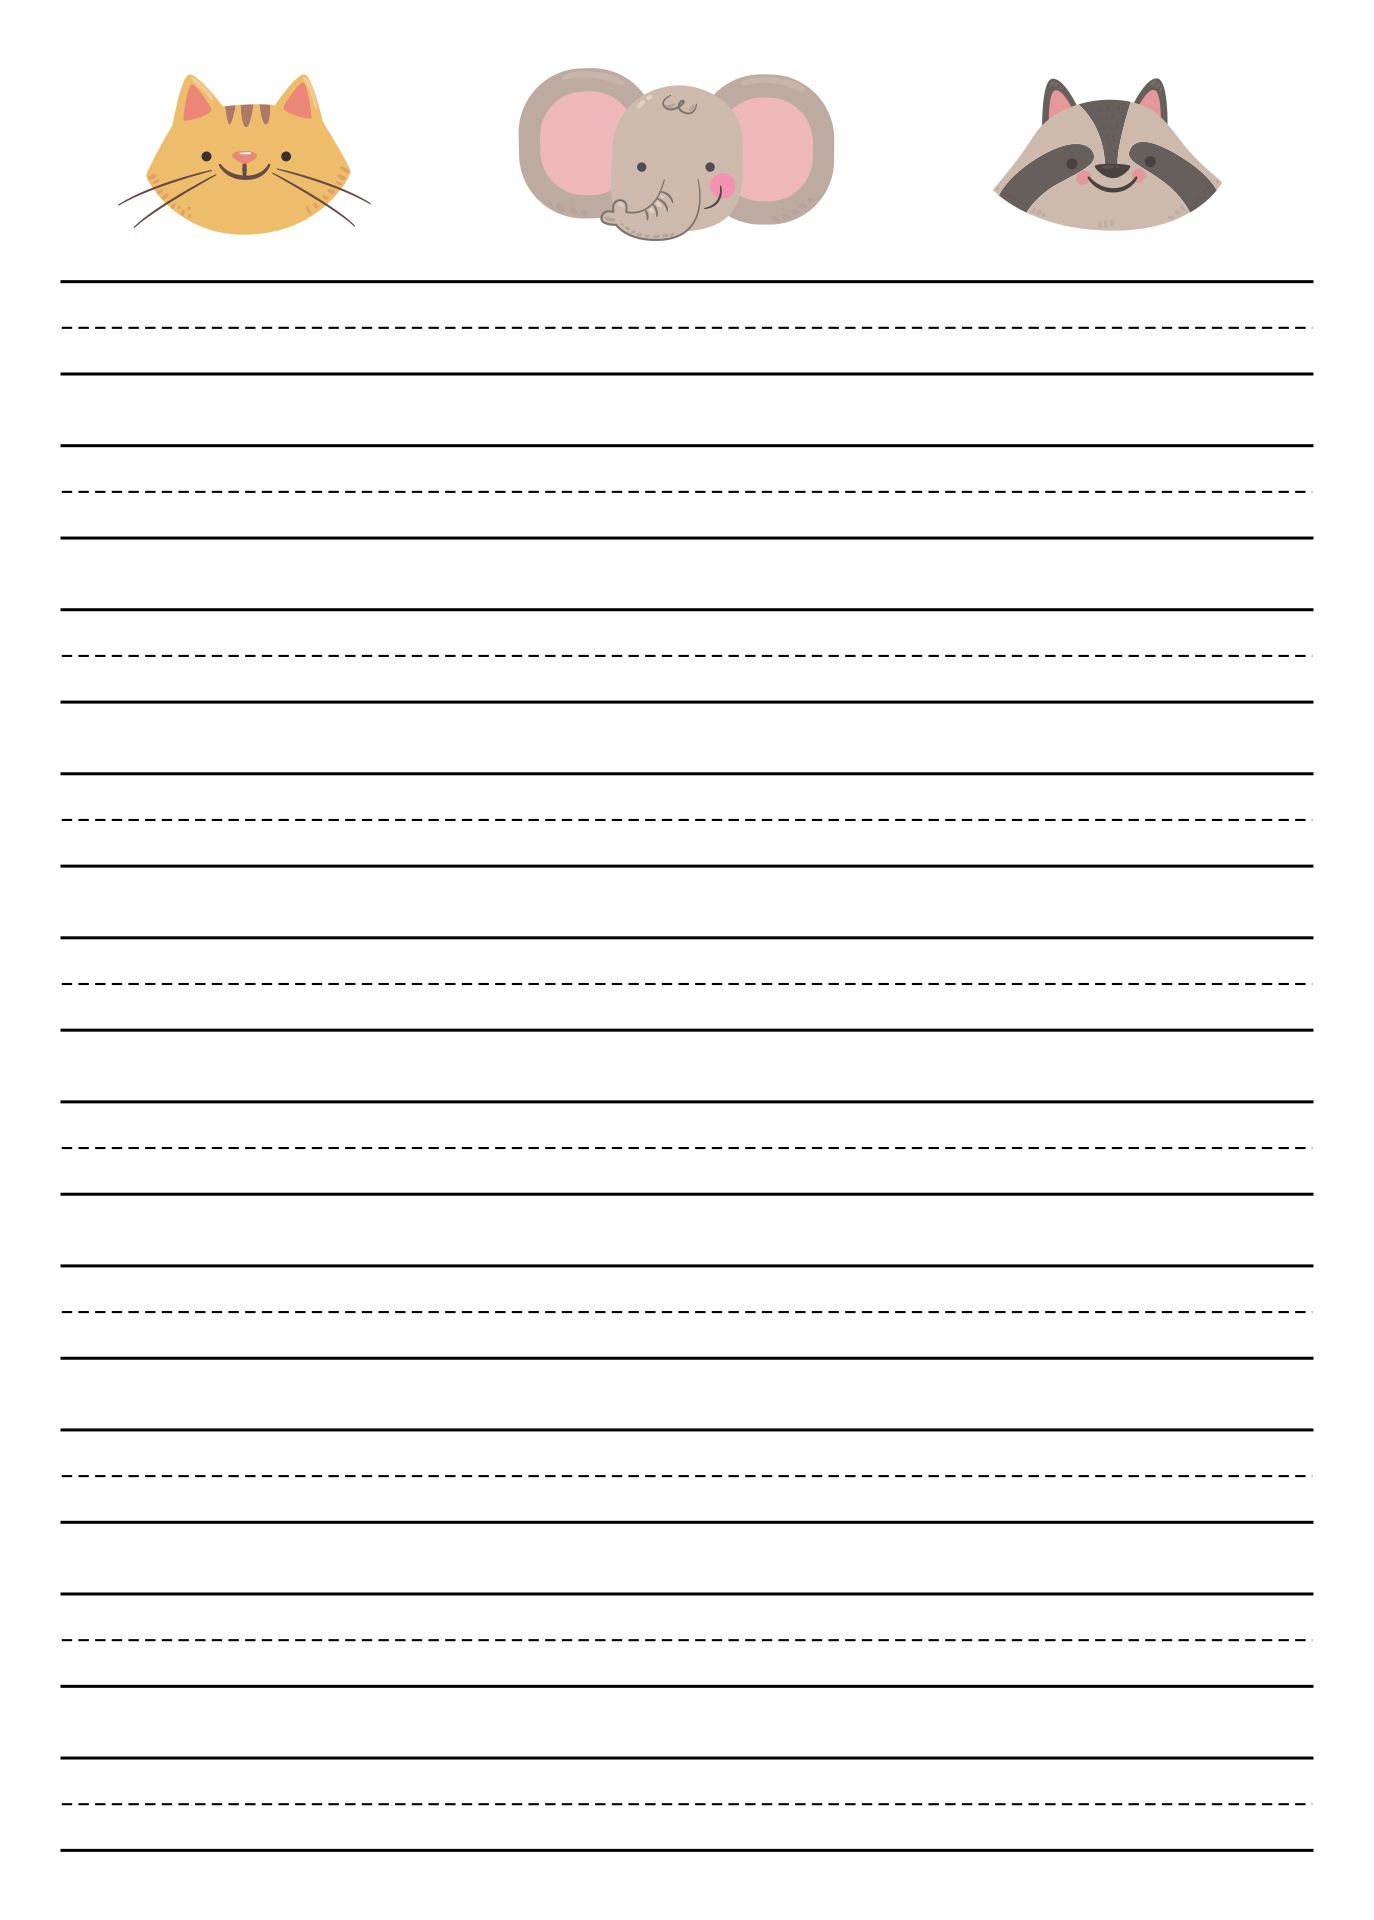 Free Printable Lined Paper For Letter Writing - Get What You Need For Free